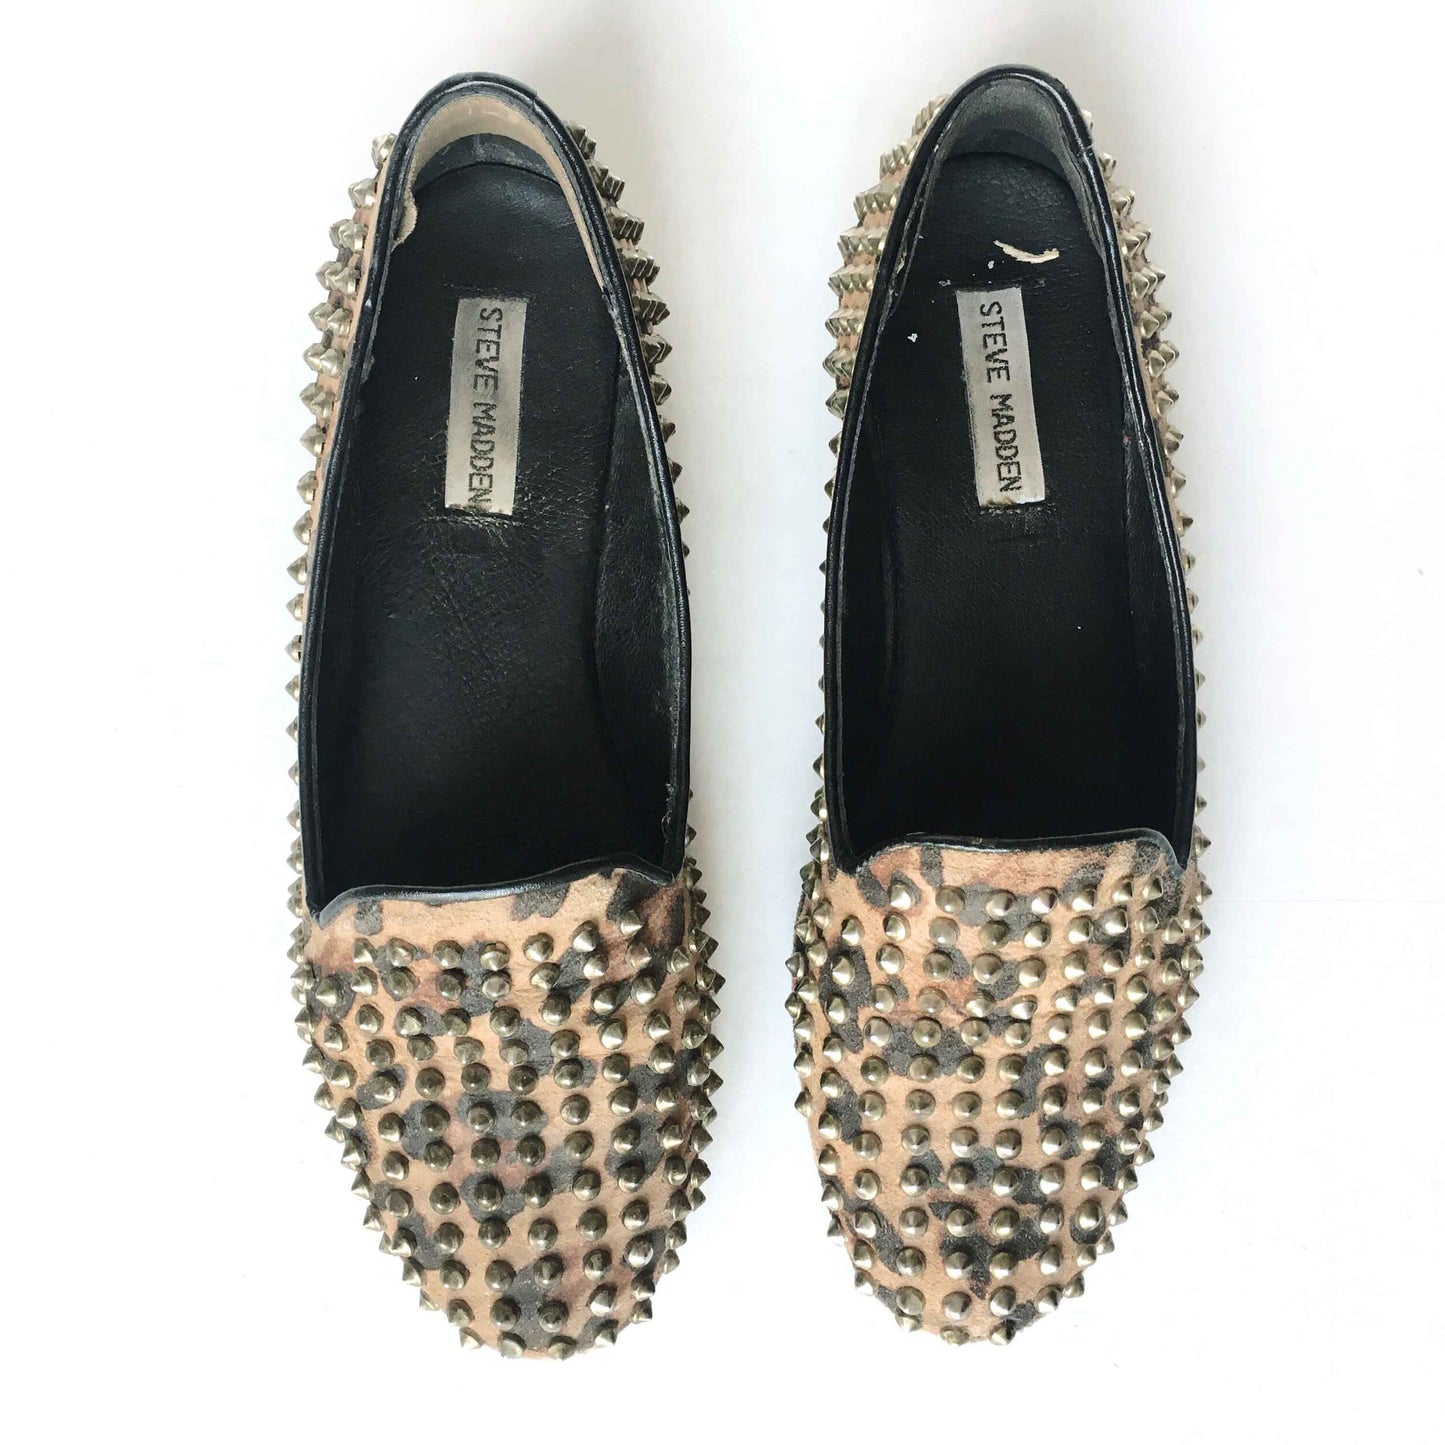 Steve Madden spiked leopard leather flats - size 10